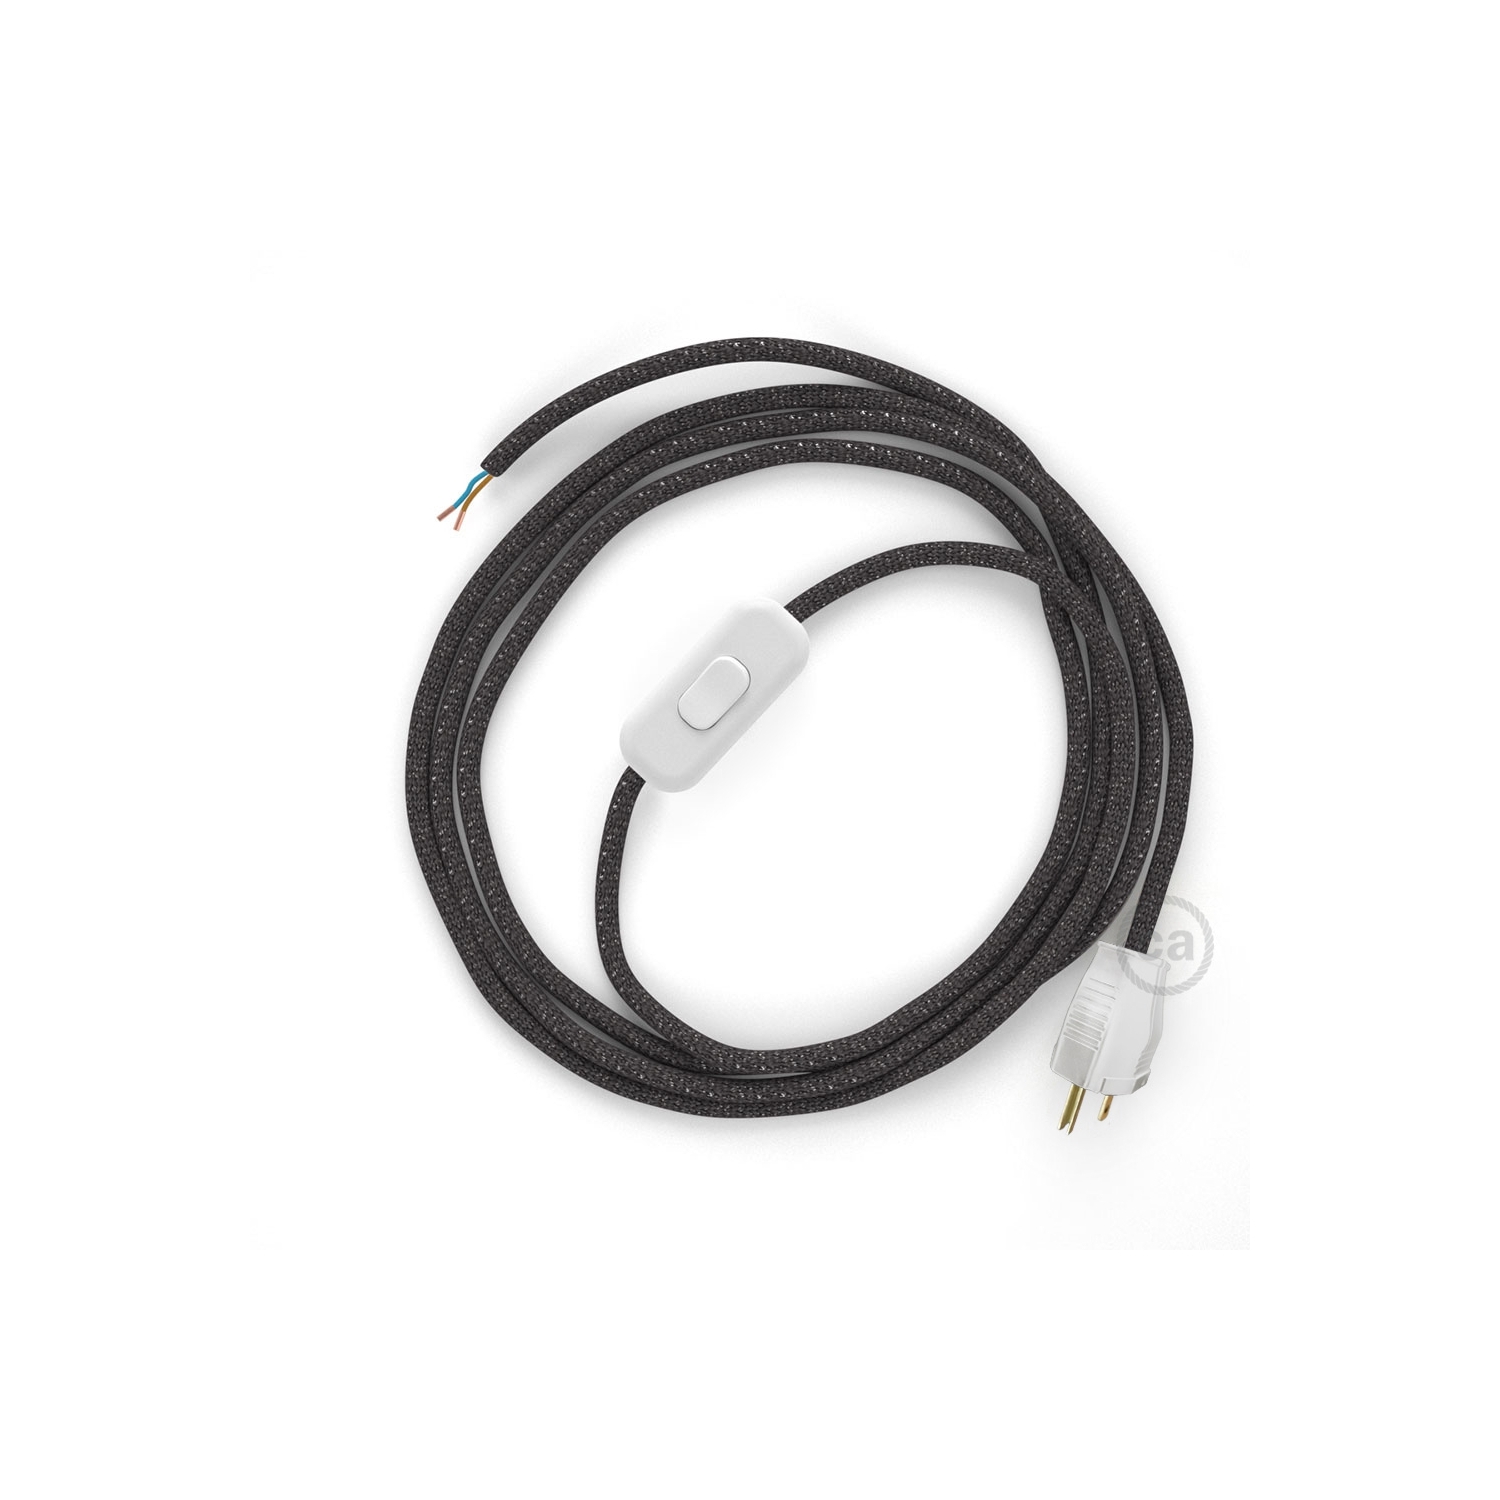 Power Cord with in-line switch, RL03 Gray Glitter - Choose color of switch/plug